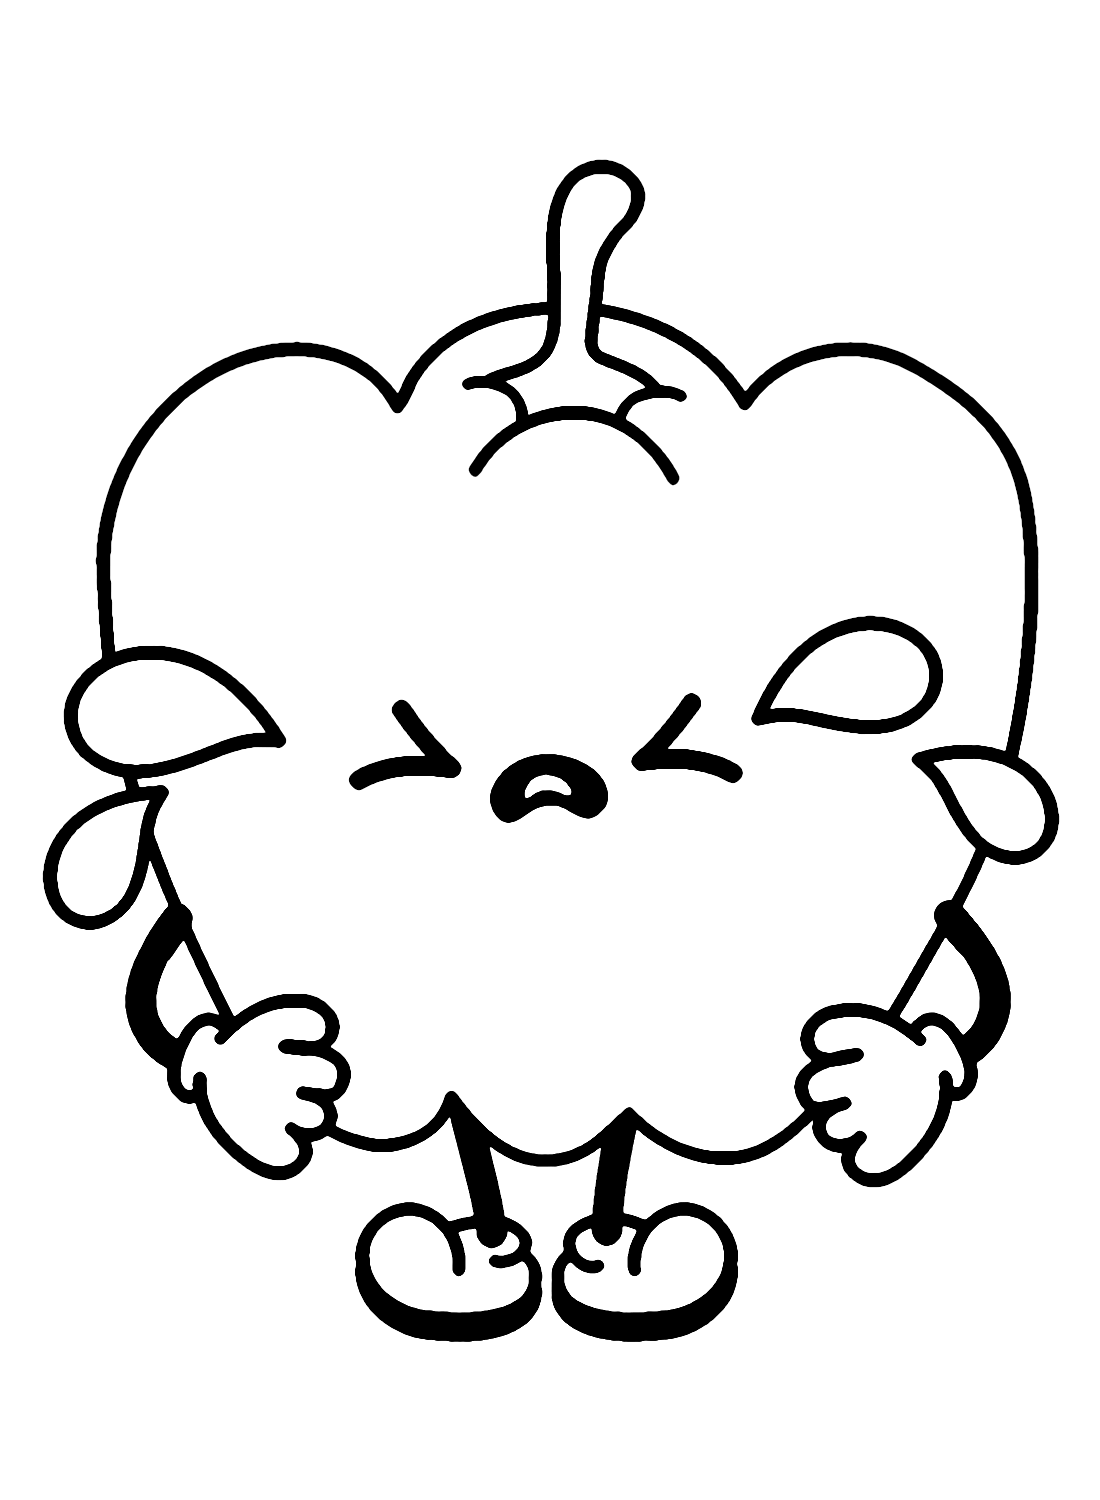 Crying Bell Pepper Coloring Page